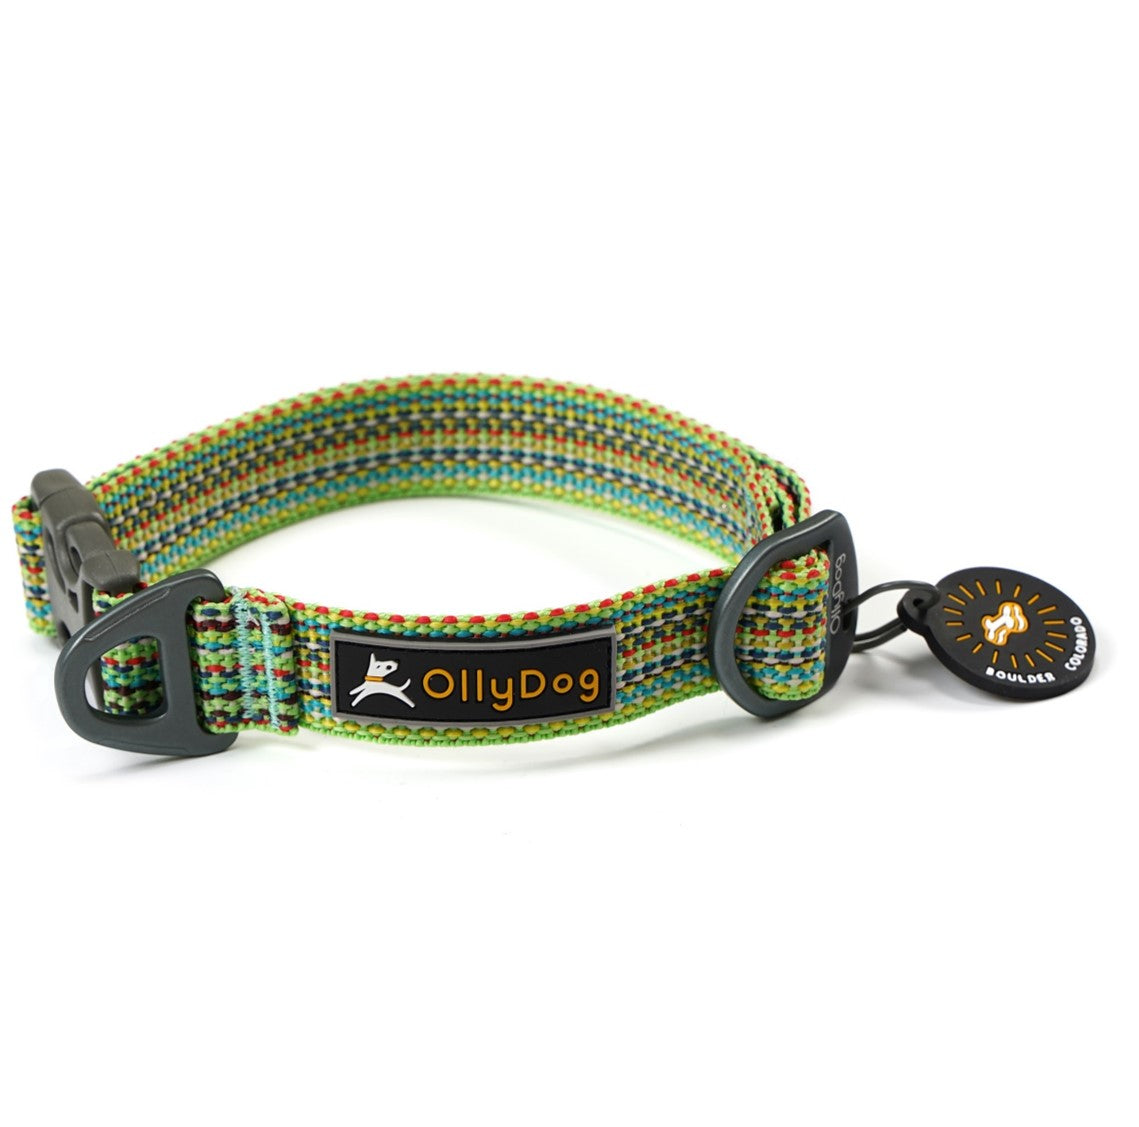 Rescue Collar- Save 20% at Checkout